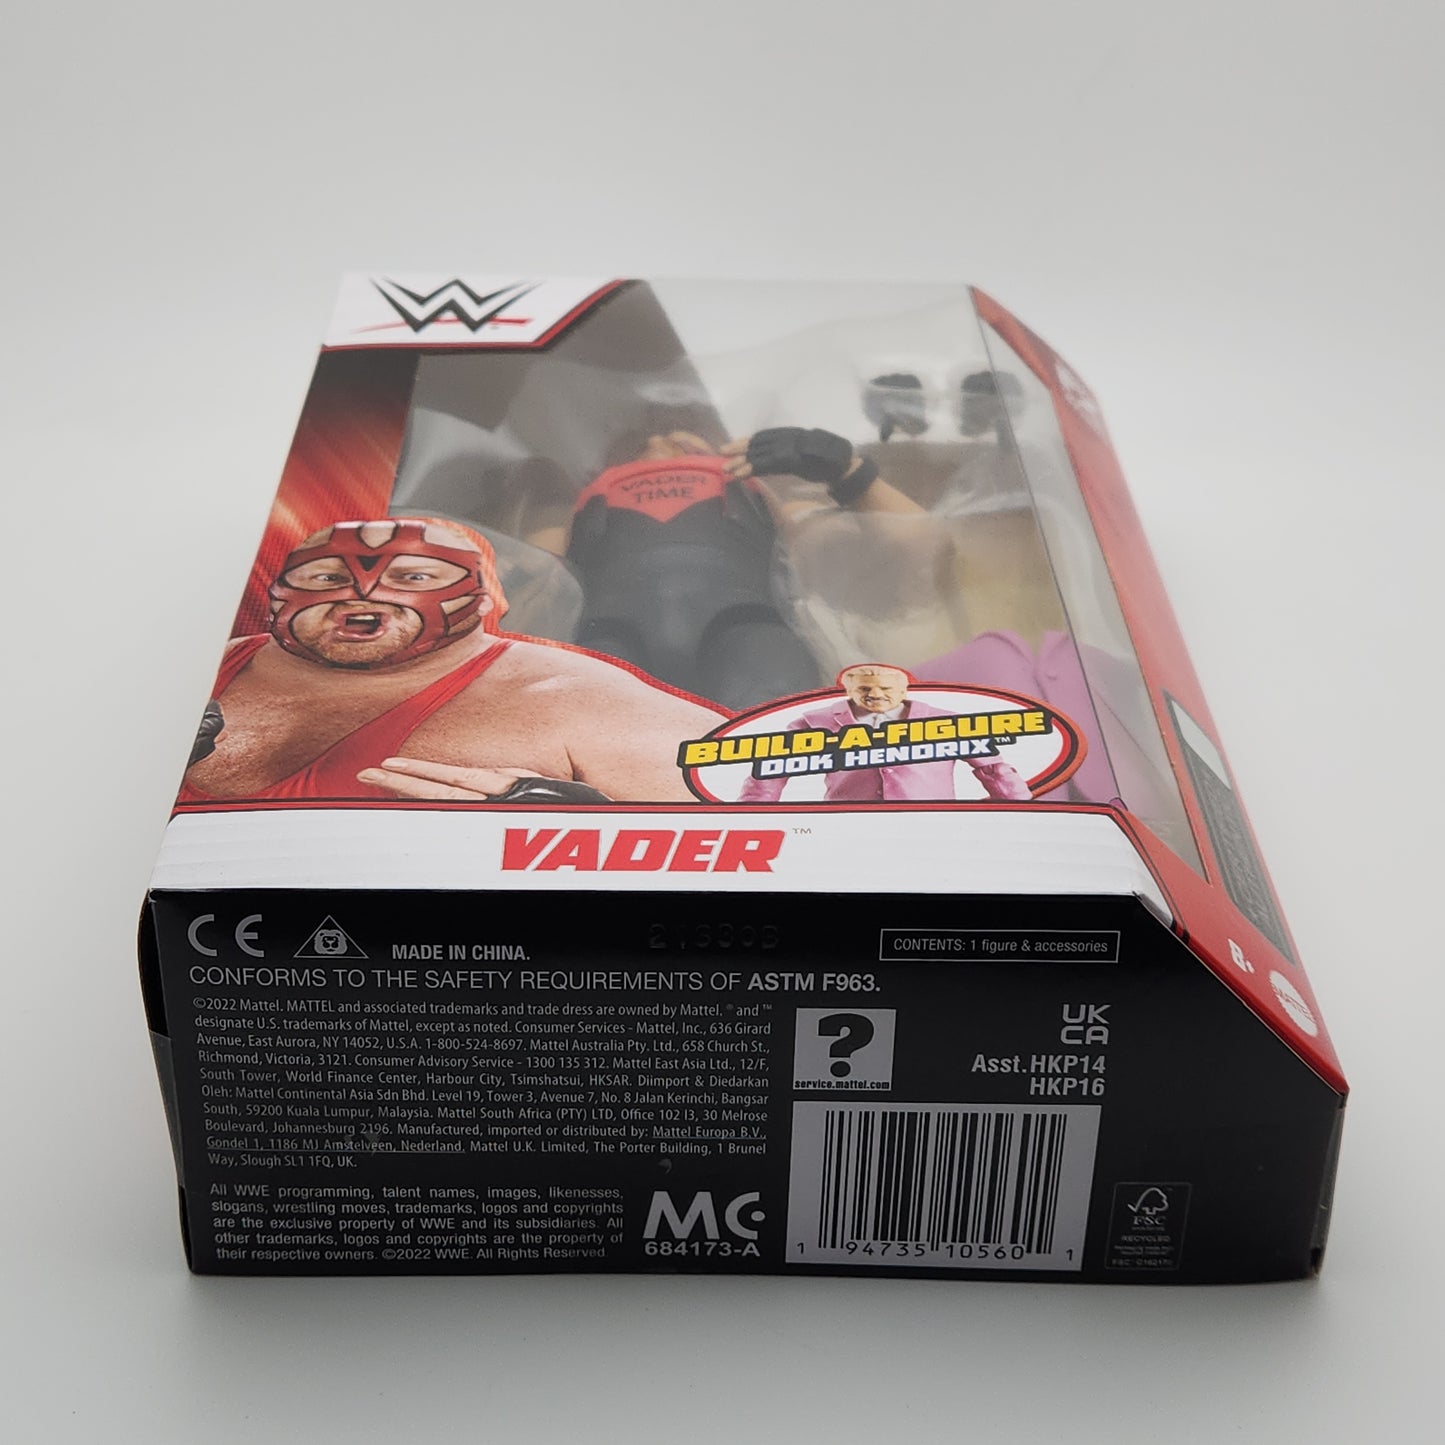 WWE Elite Collection Series- Royal Rumble- Vader